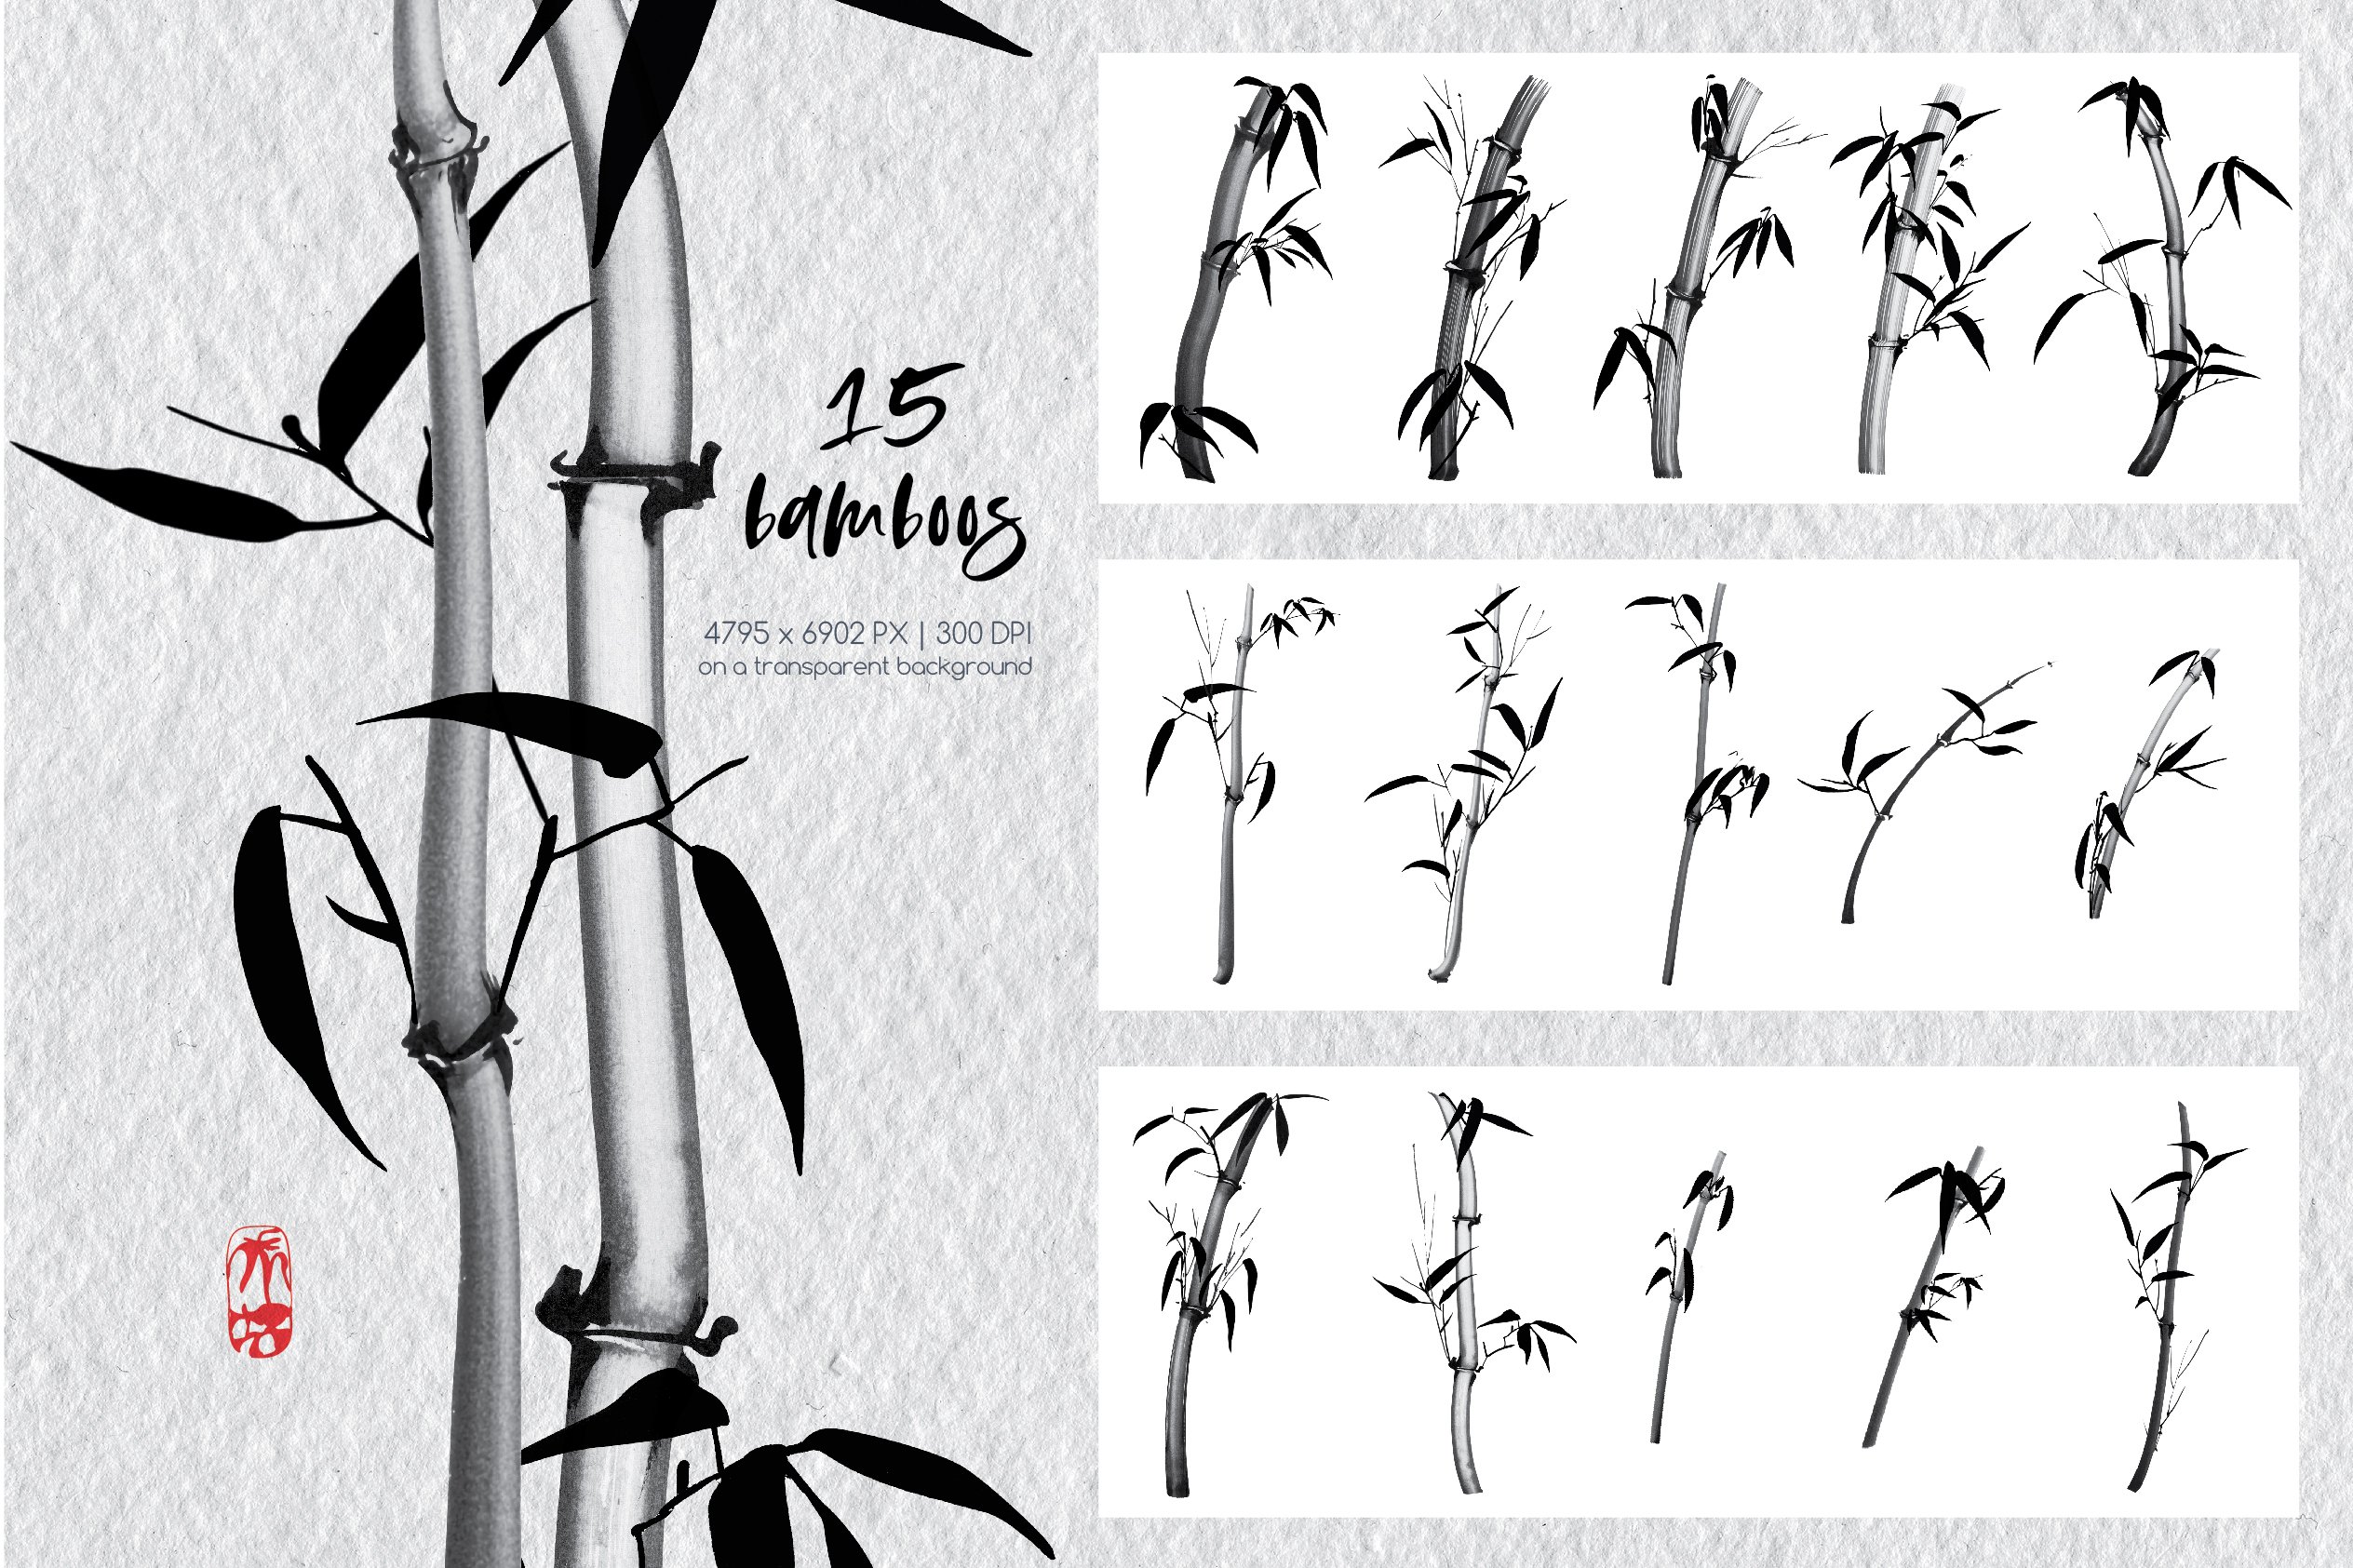 Drawing of a bamboo tree with different stages of growth.